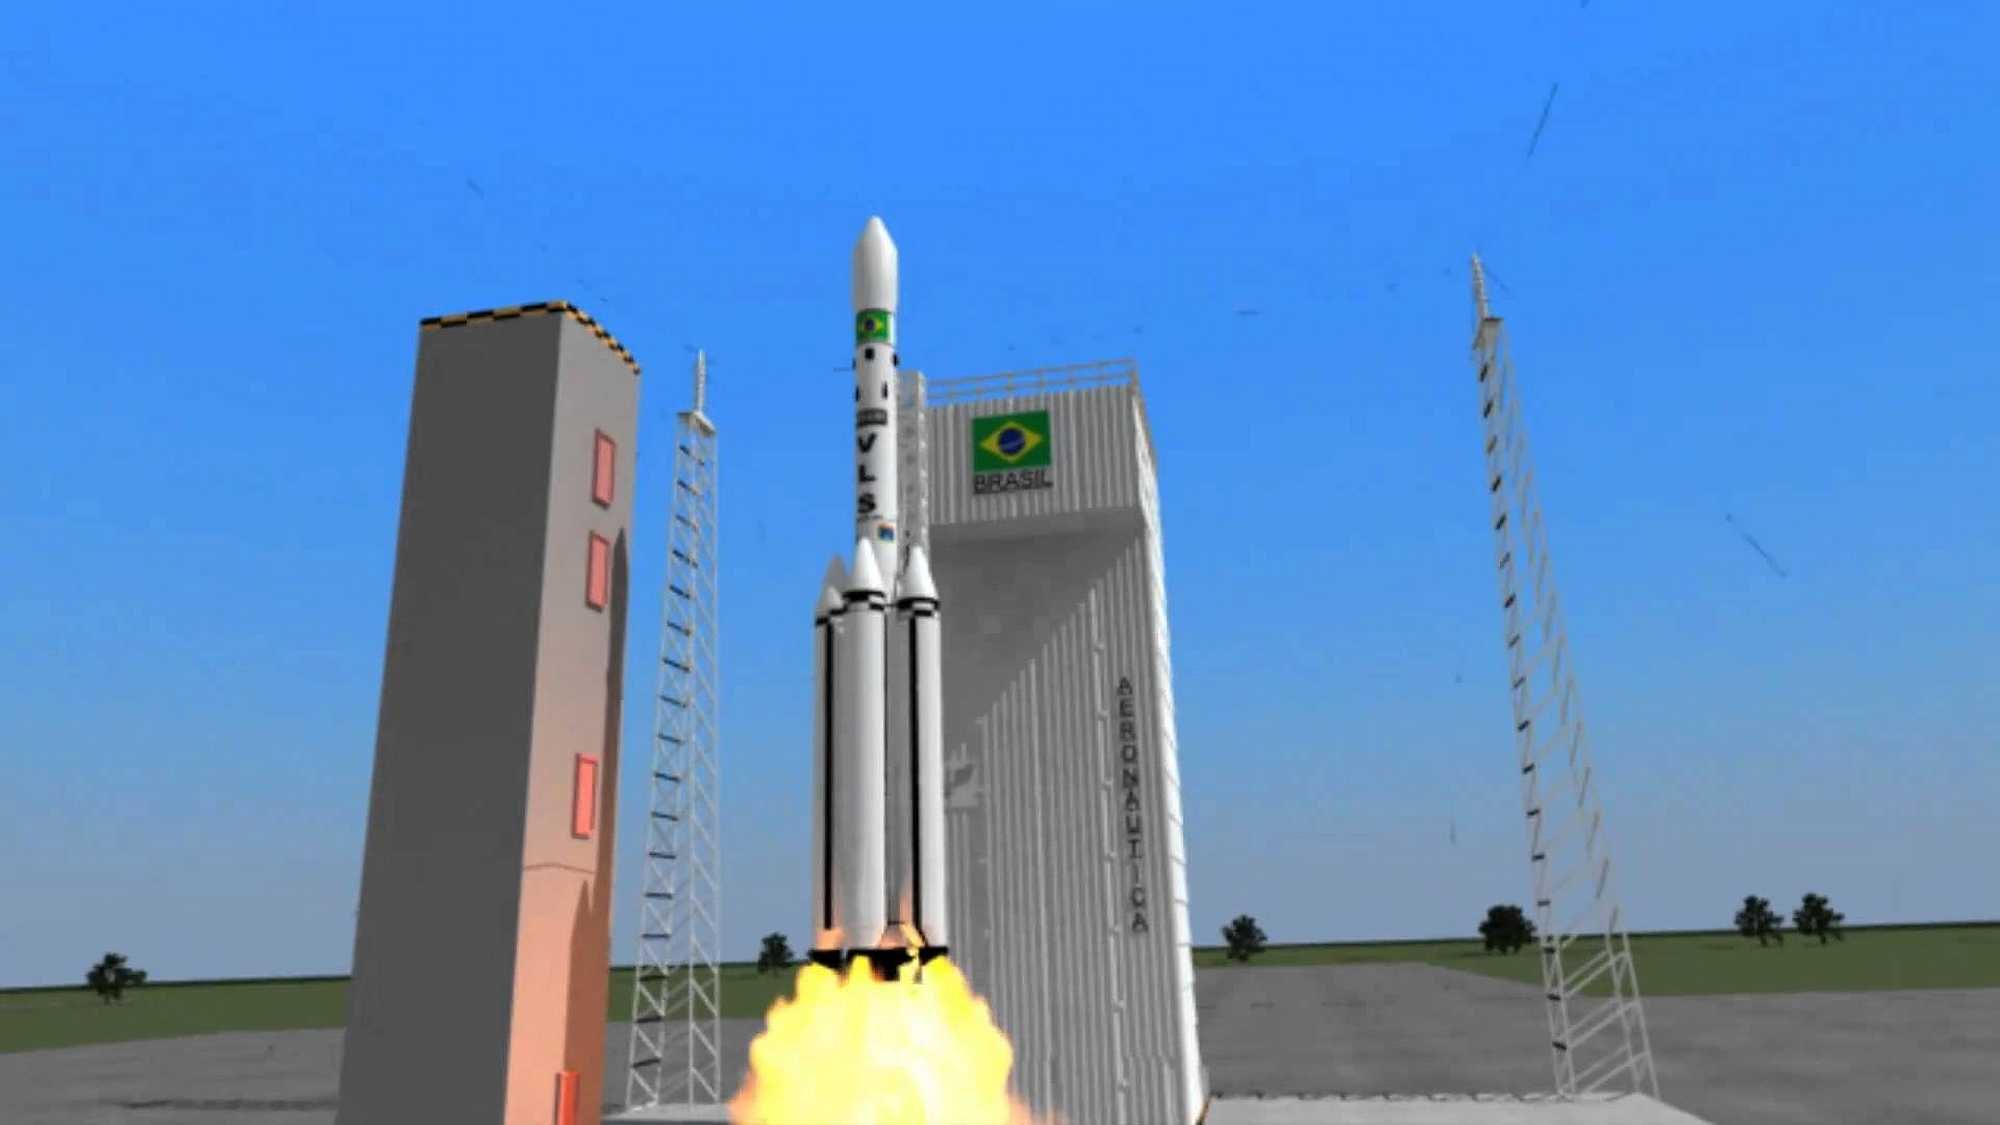 Launching of the VLS-01 rocket from Alcântara Launch Center